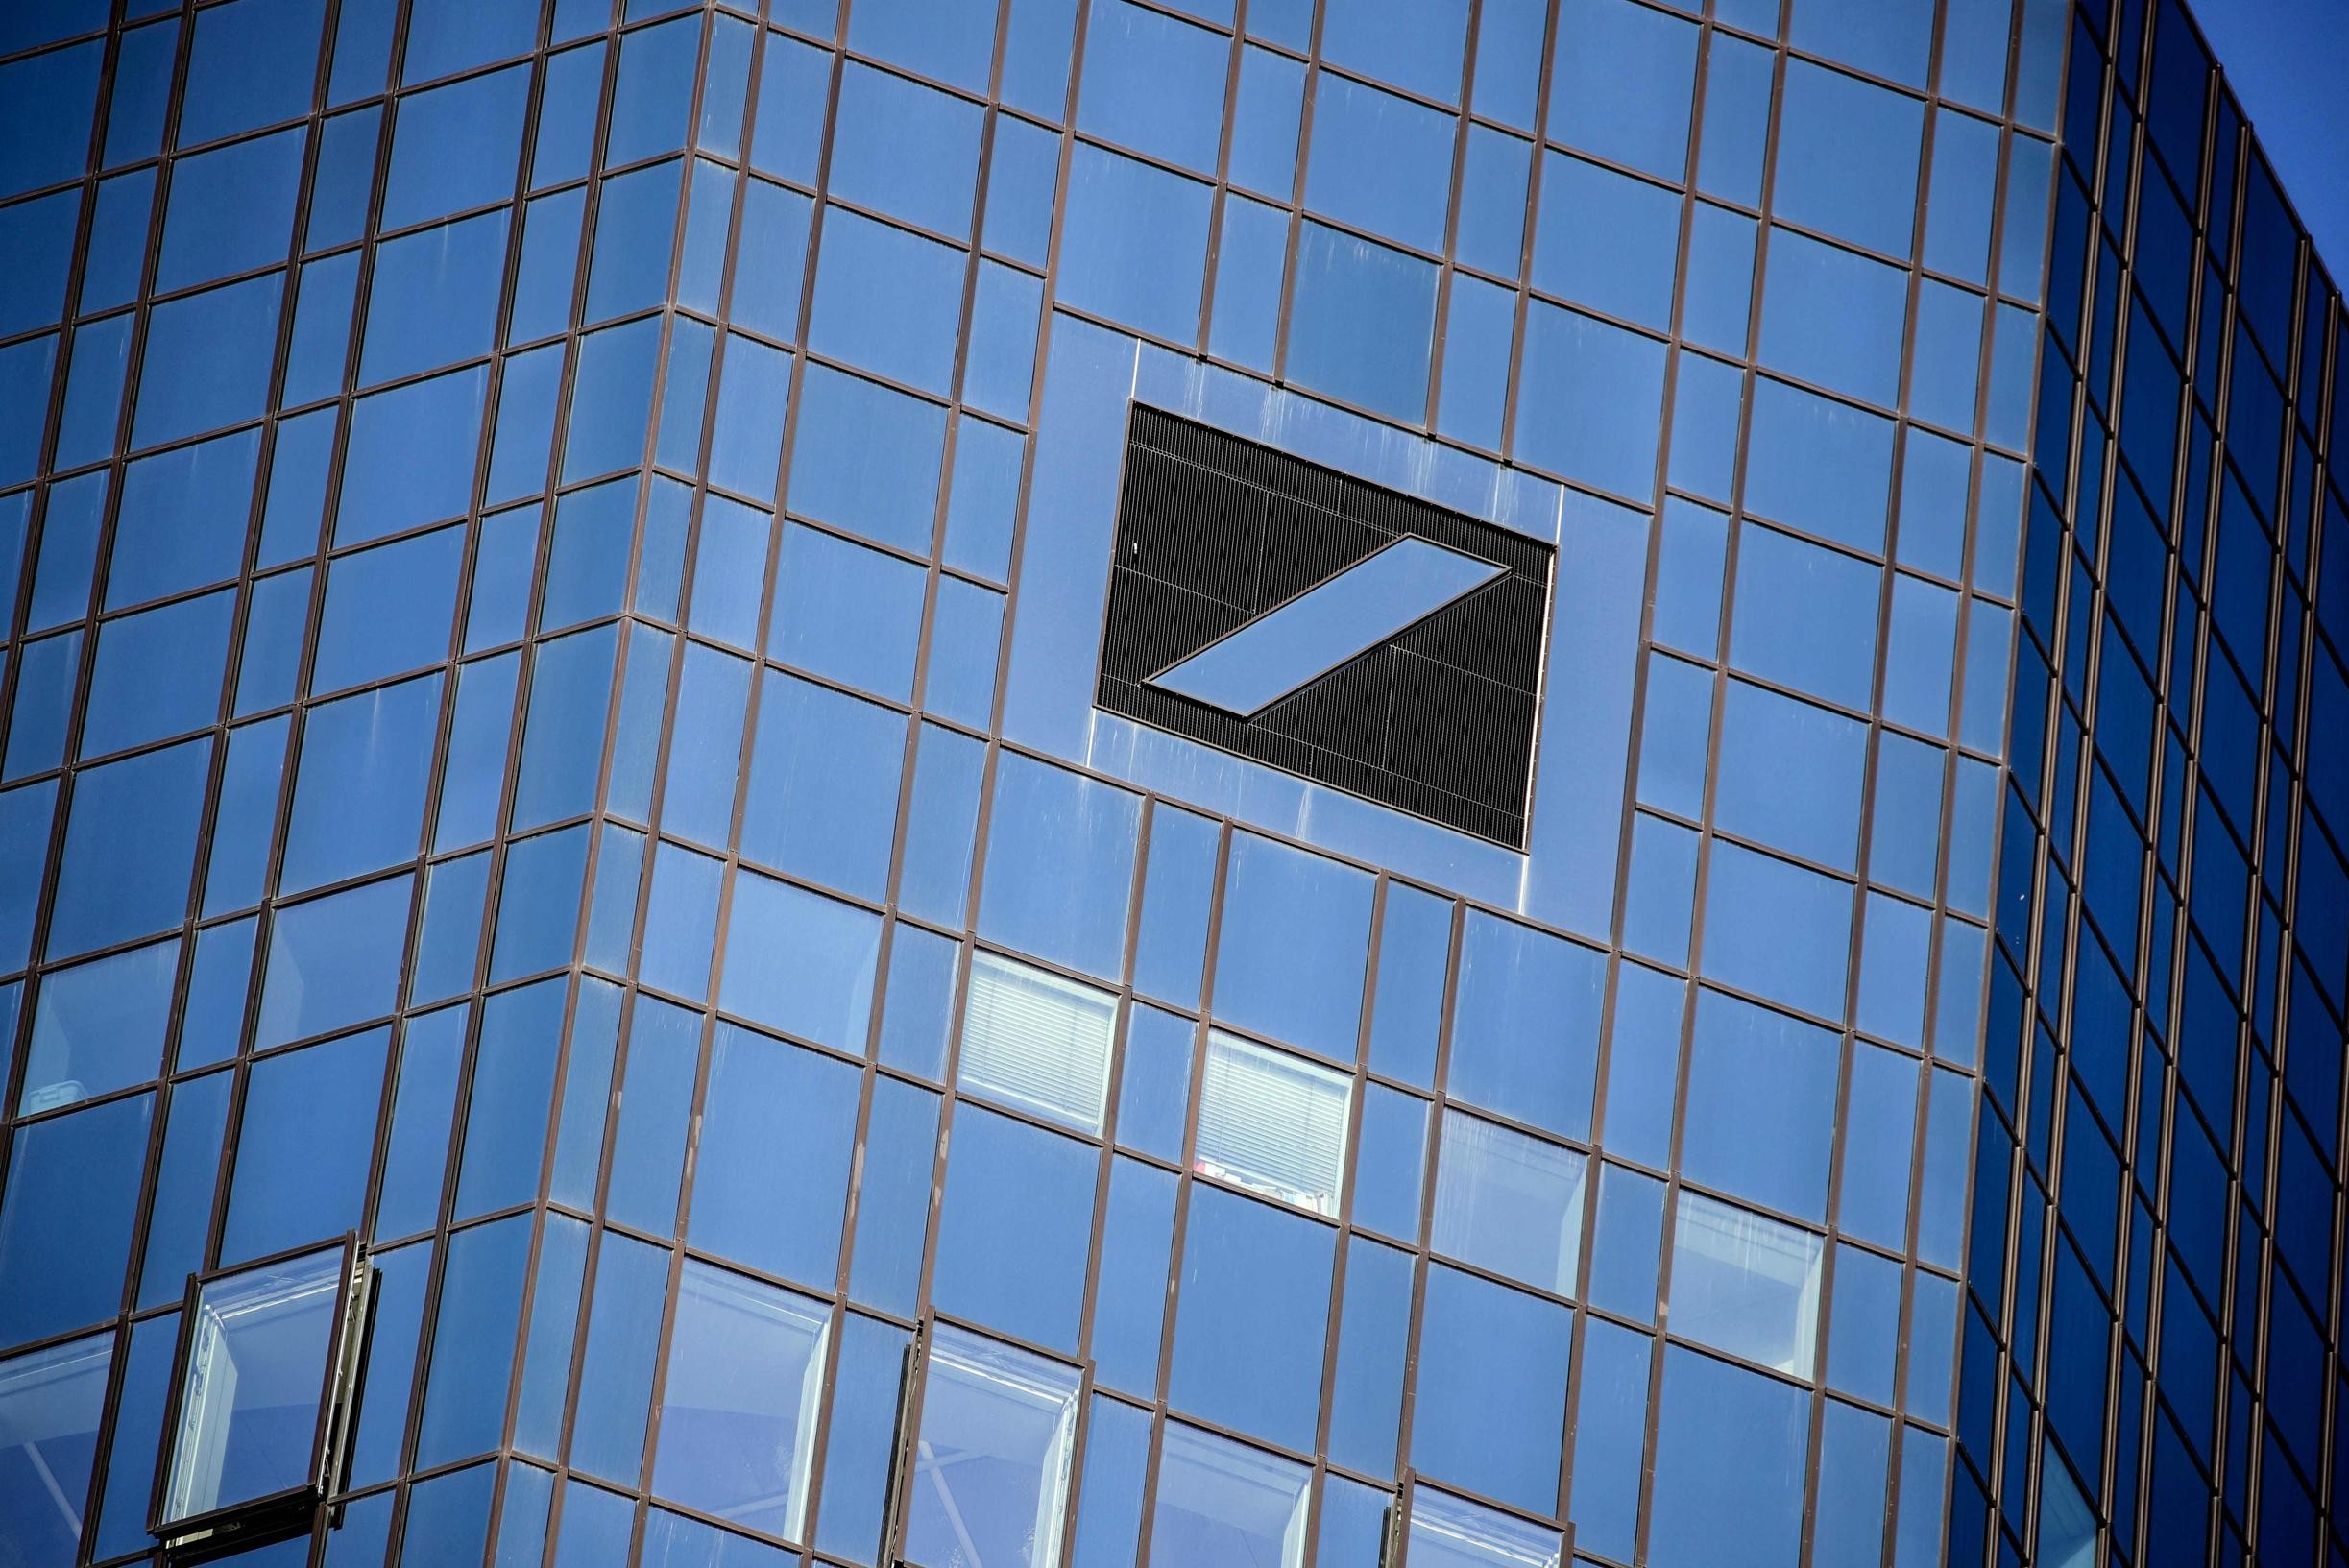 House searches at Deutsche Bank in investigation into ‘greenwashing’